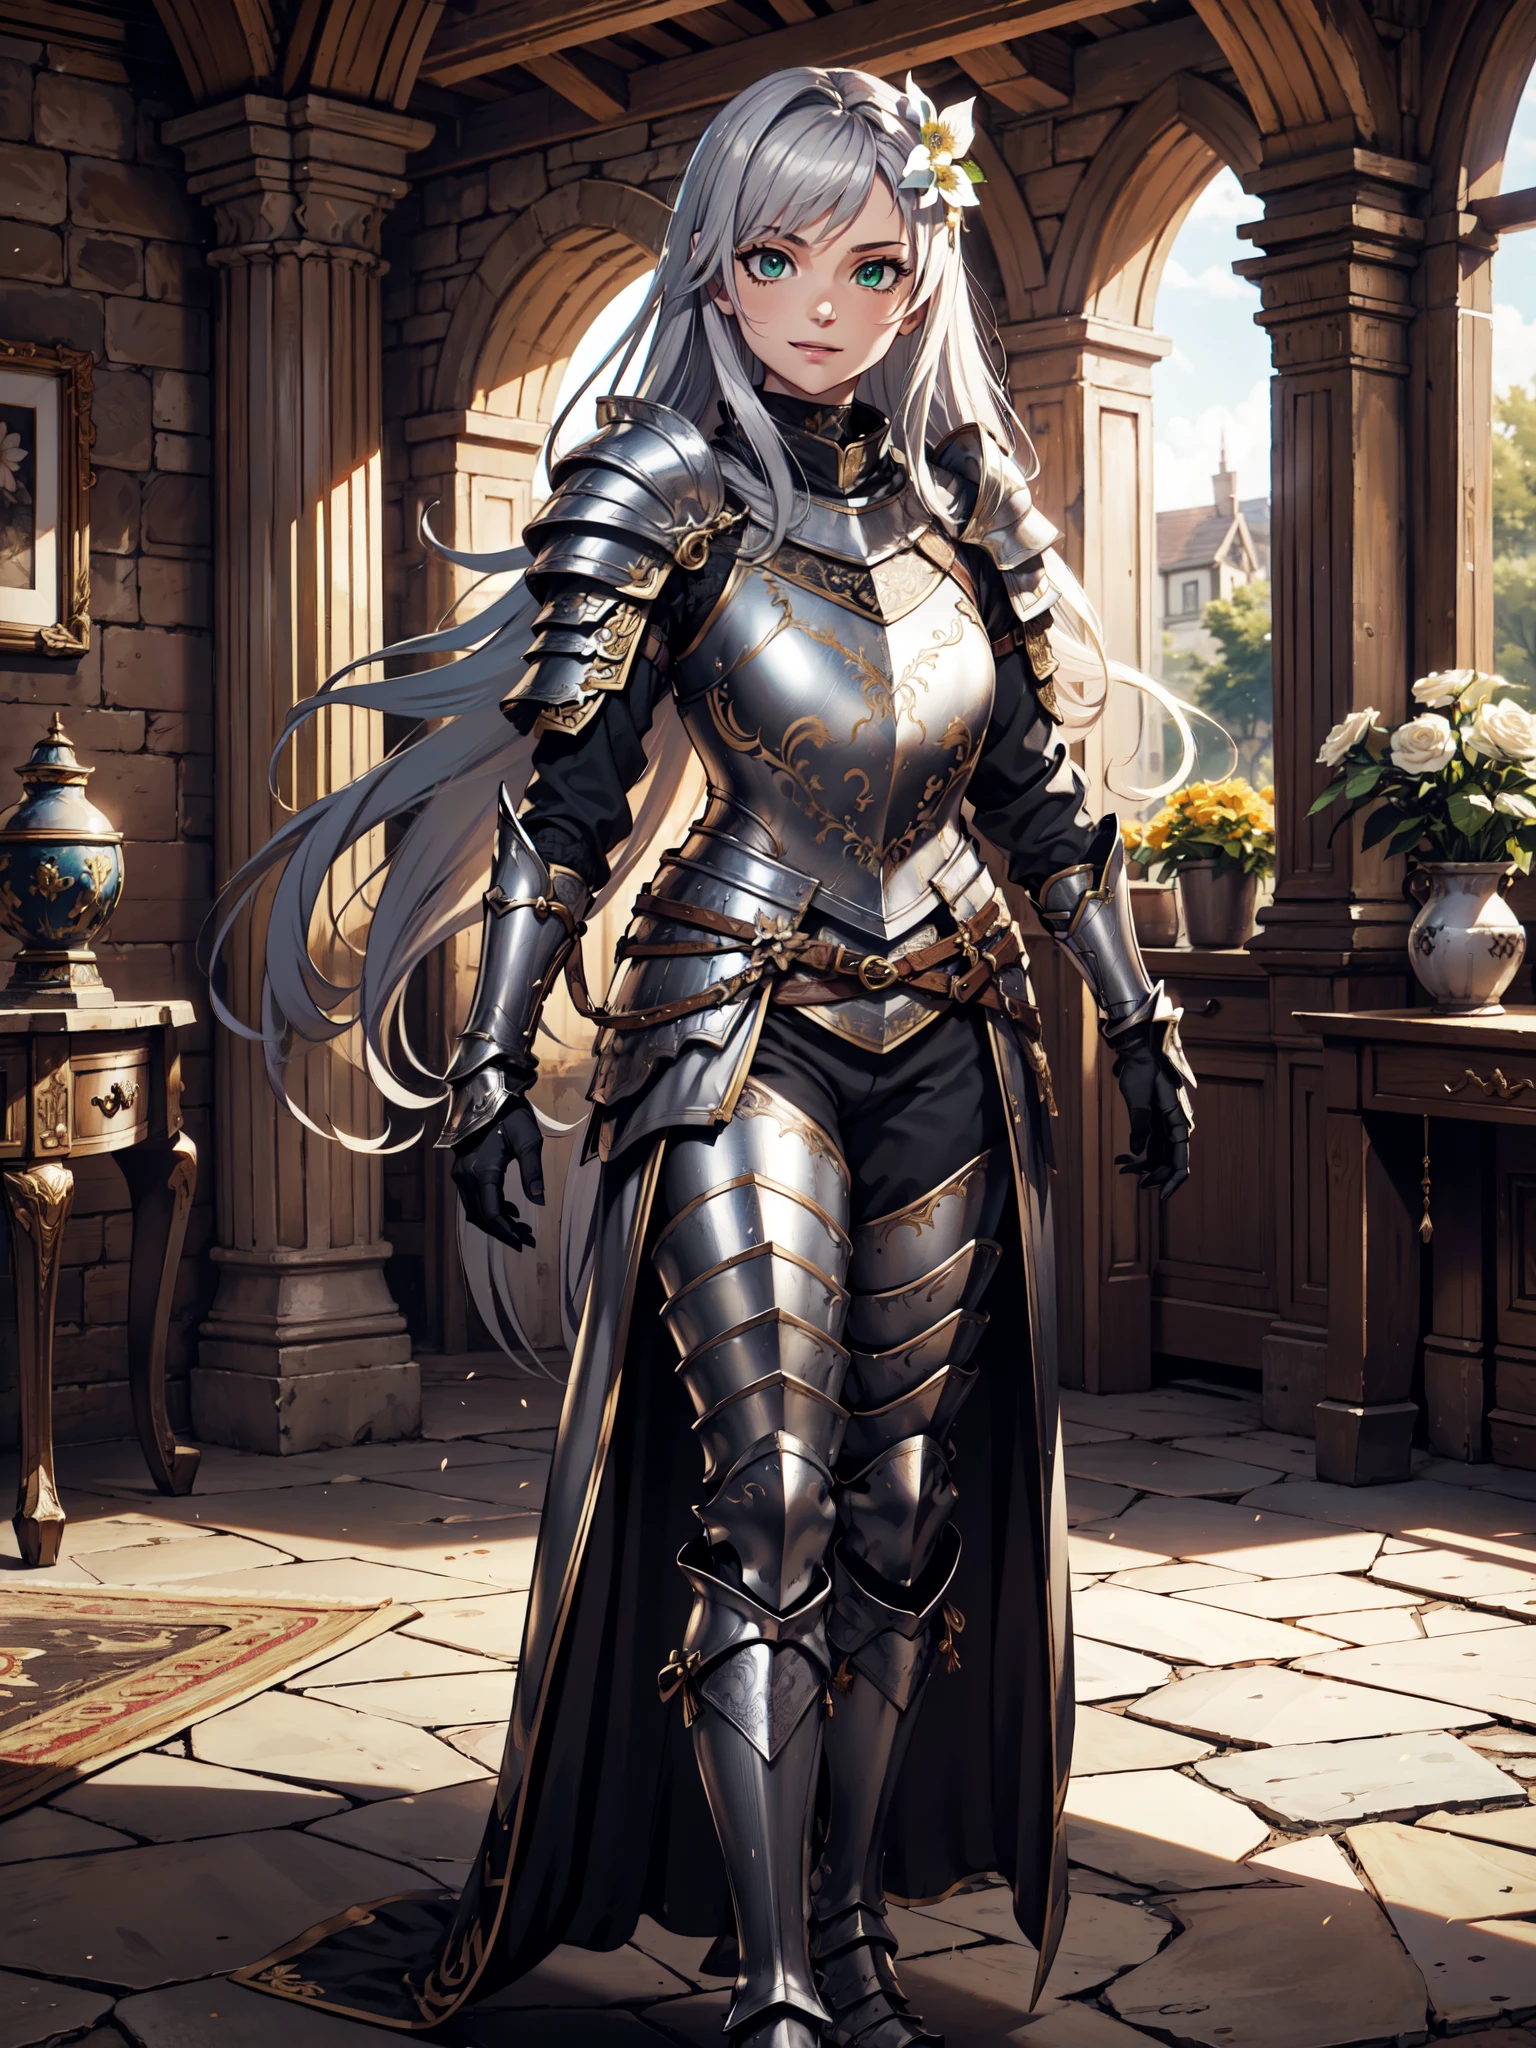 Ultra High Definition, Ultra High Quality, Hyper Definition, Hyper Quality, Hyper Detailed, Extremely Detailed, Perfectly Detailed, 8k, 1 Anime Female, ((Long Silver Hair)), Noble Armor, ((Leg Armor, Armored Pants, Symmetric)), Gloves, Solid Green Eyes, Cheerful Expression, White Flower Barrette, Armored With Full Coverage Noble Plate Armor, Leg Armor, Mansion Room Panoramic Background